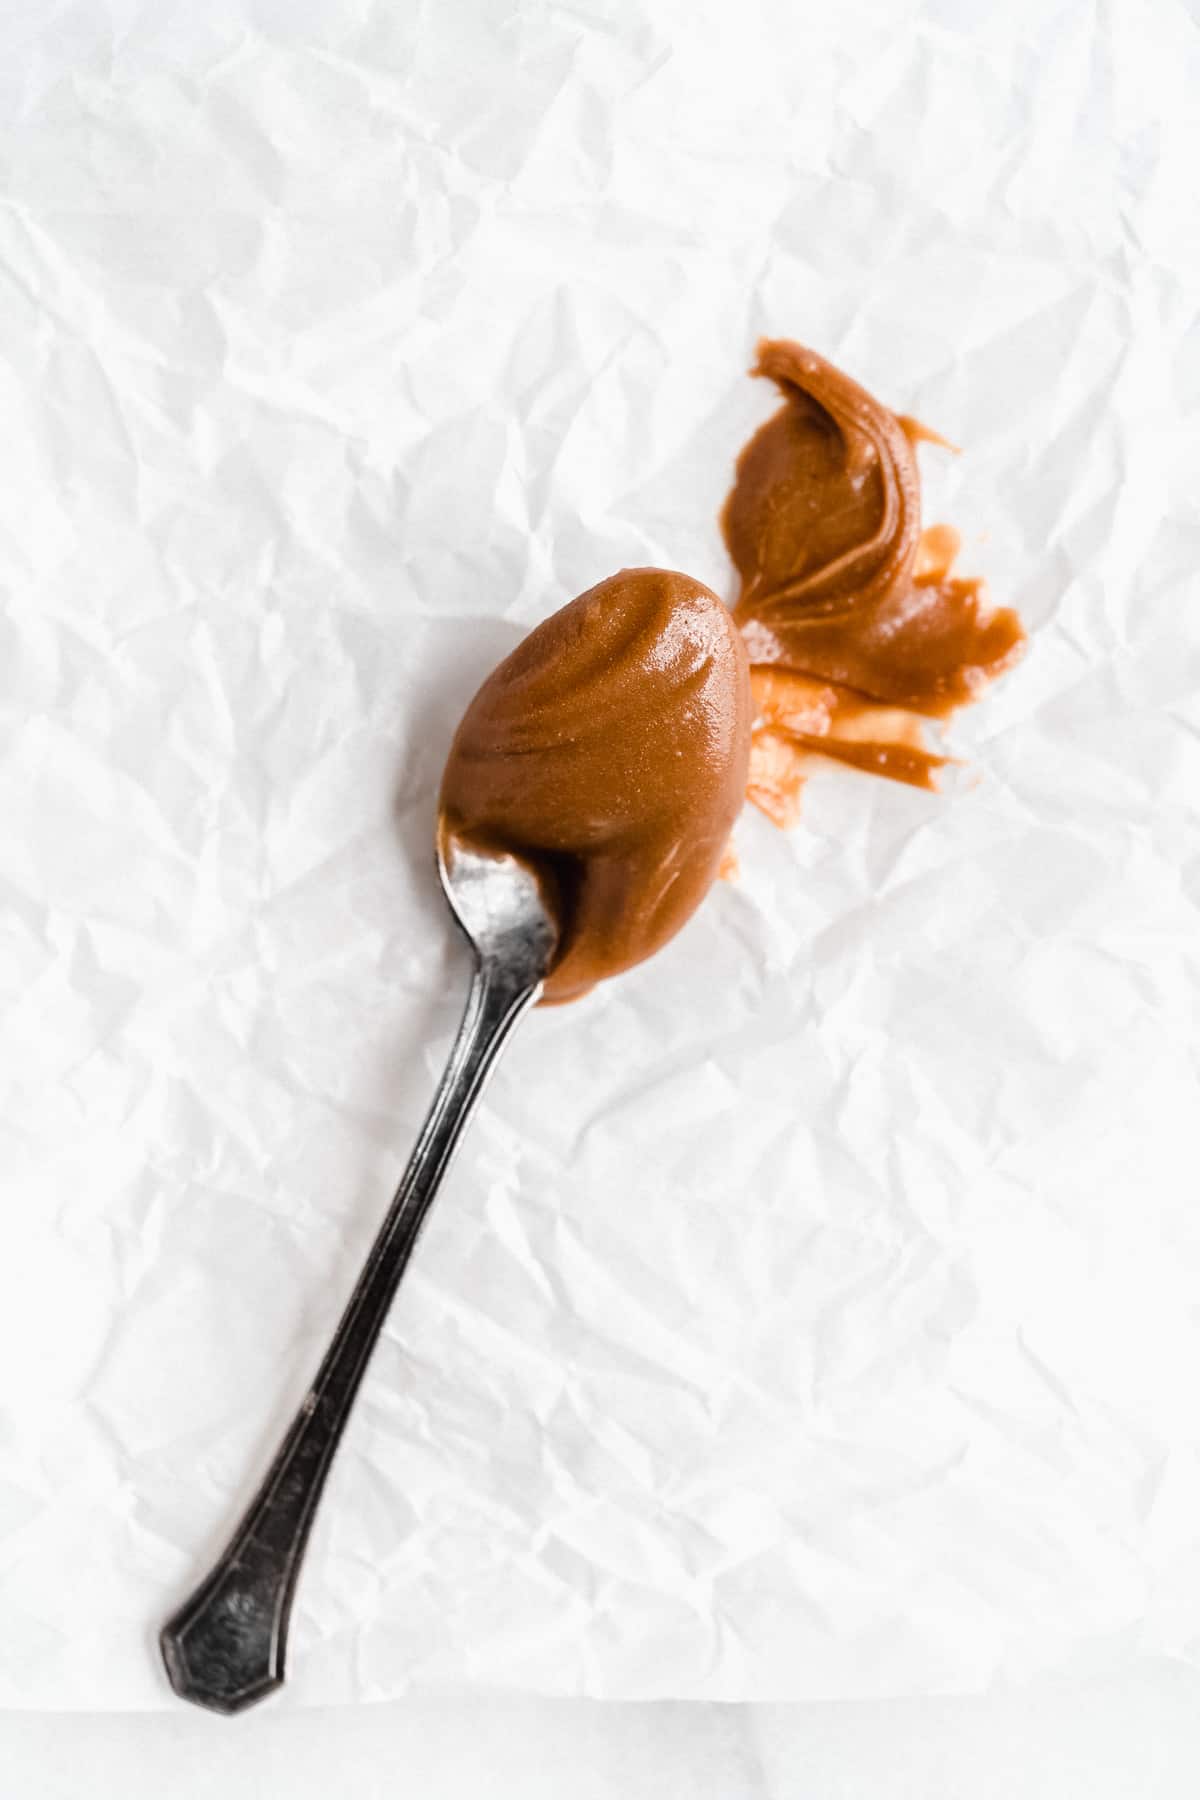 Overhead closeup photo of a silver spoon full of dairy free caramel.